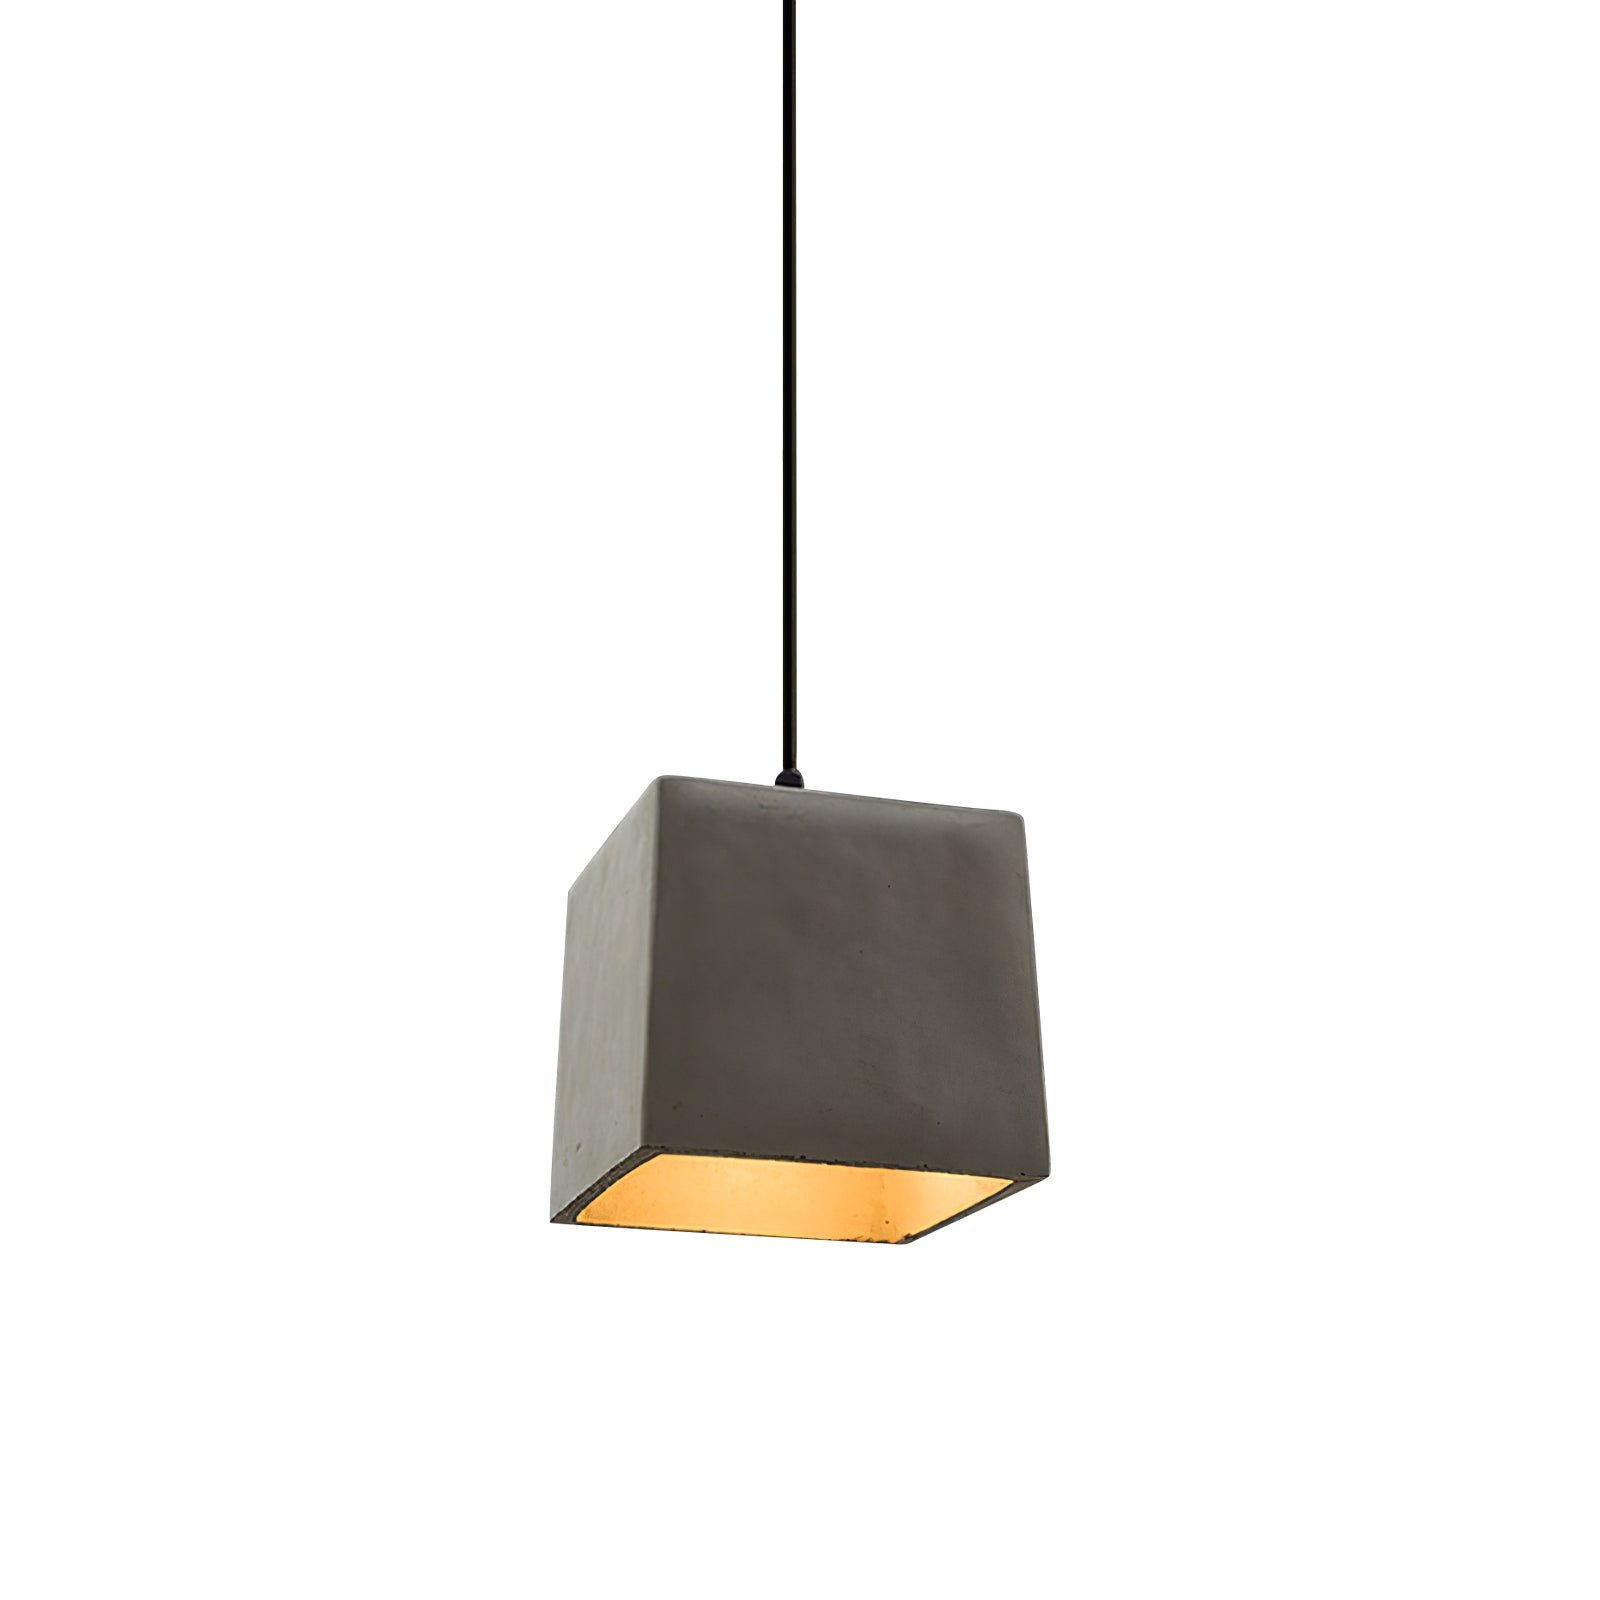 Grey Georgia Cement Pendant Light with a diameter of 5.9 inches and a height of 5.5 inches (15cm x 14cm, ∅ 15cm x H 14cm).